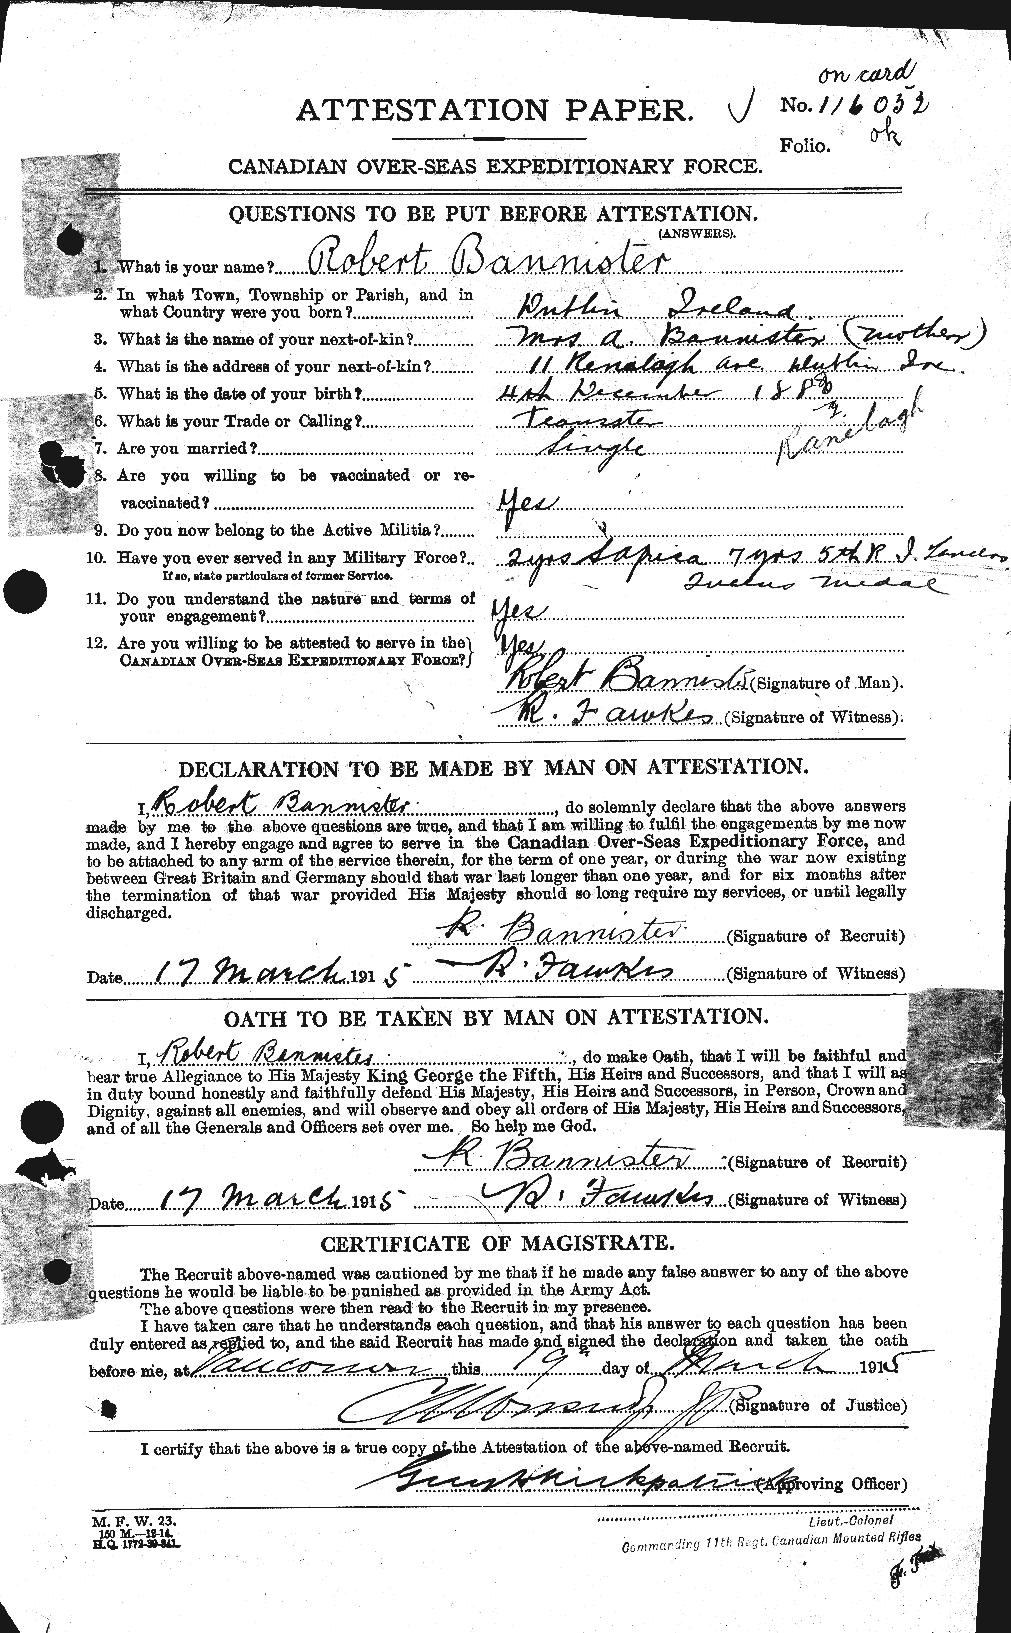 Personnel Records of the First World War - CEF 224770a